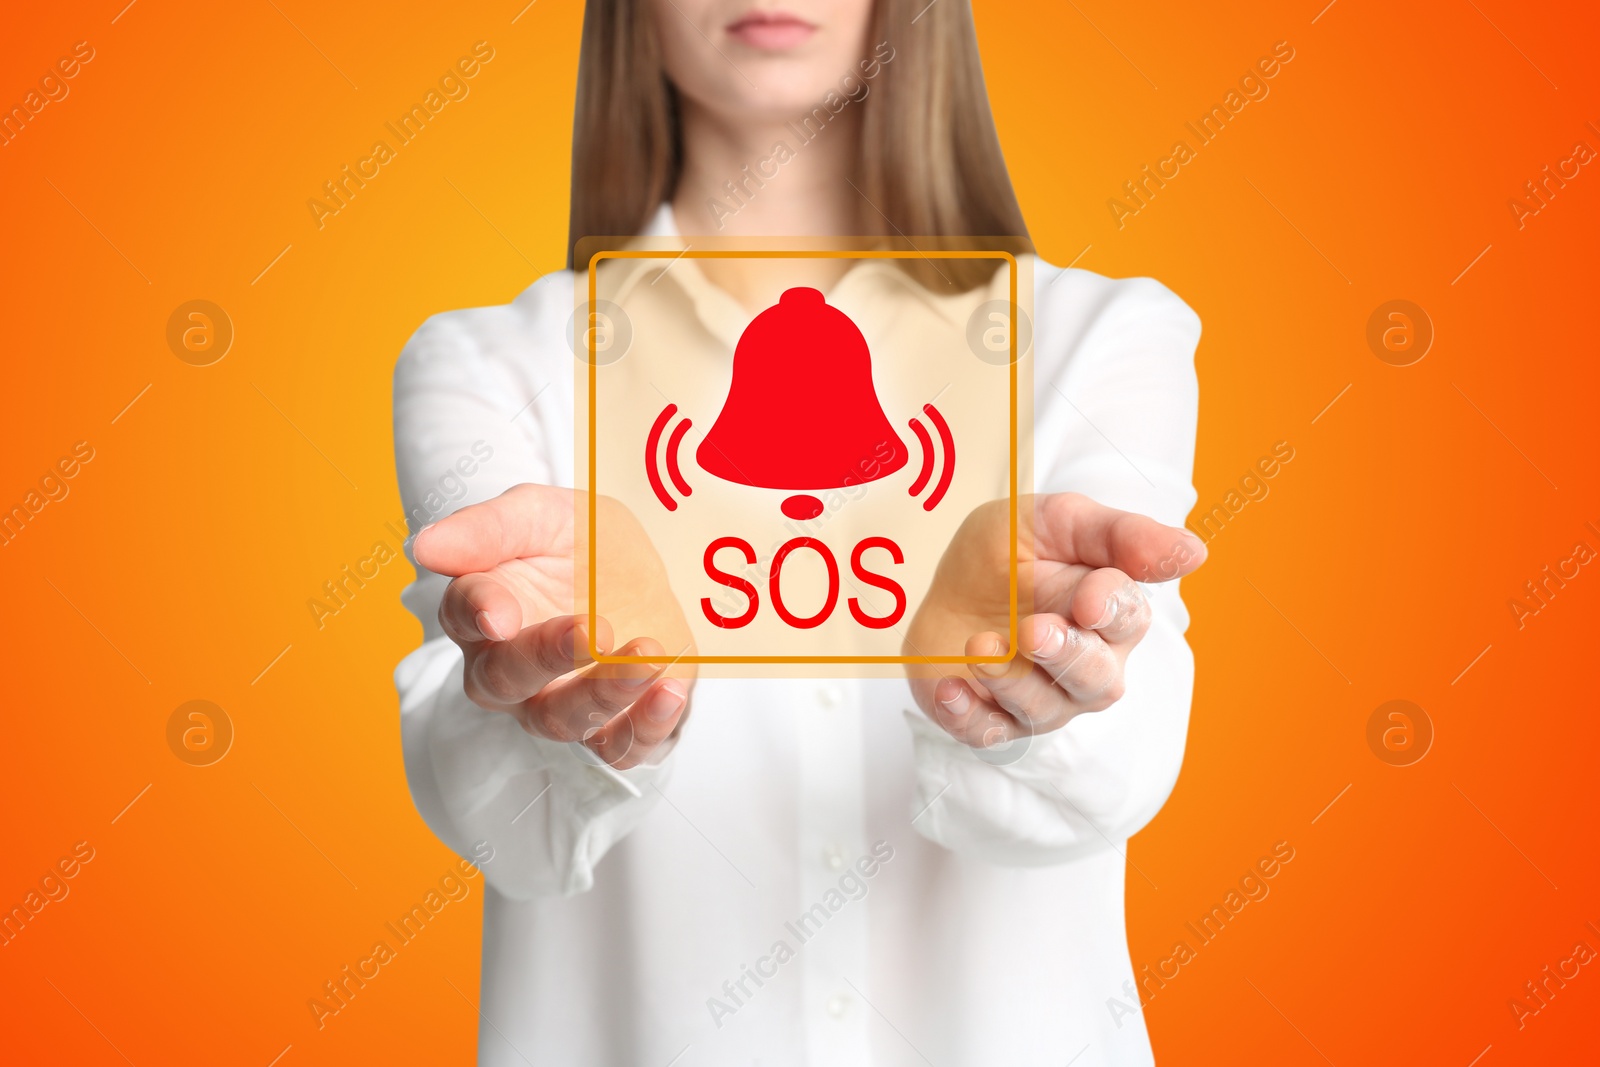 Image of Young woman holding virtual icon SOS on orange background, closeup